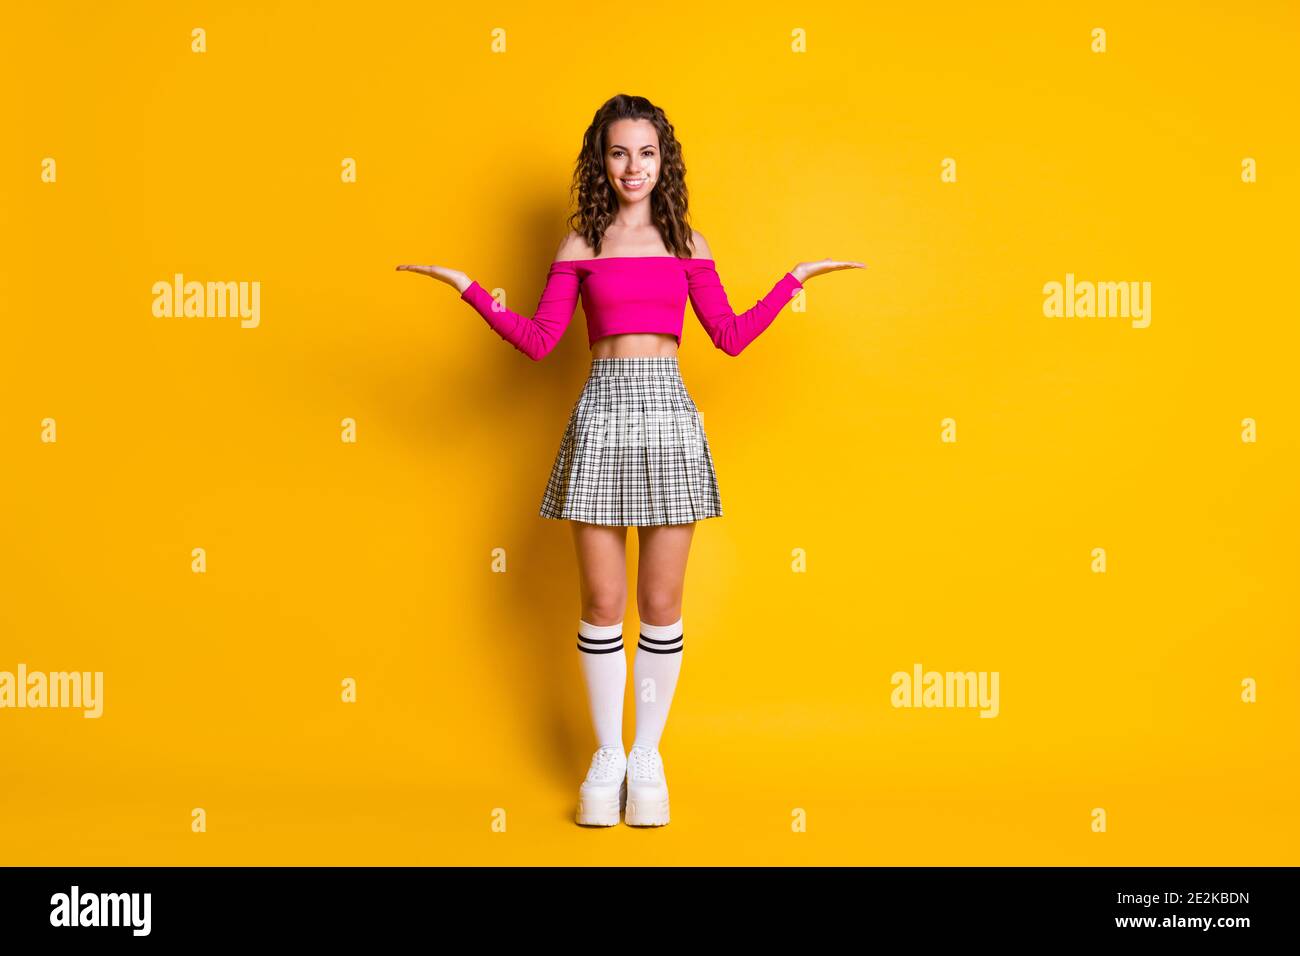 Photo portrait full body view schoolgirl holds hands palms with copyspaces showing choices wearing pink top checkered skirt trainers knee-high socks Stock Photo